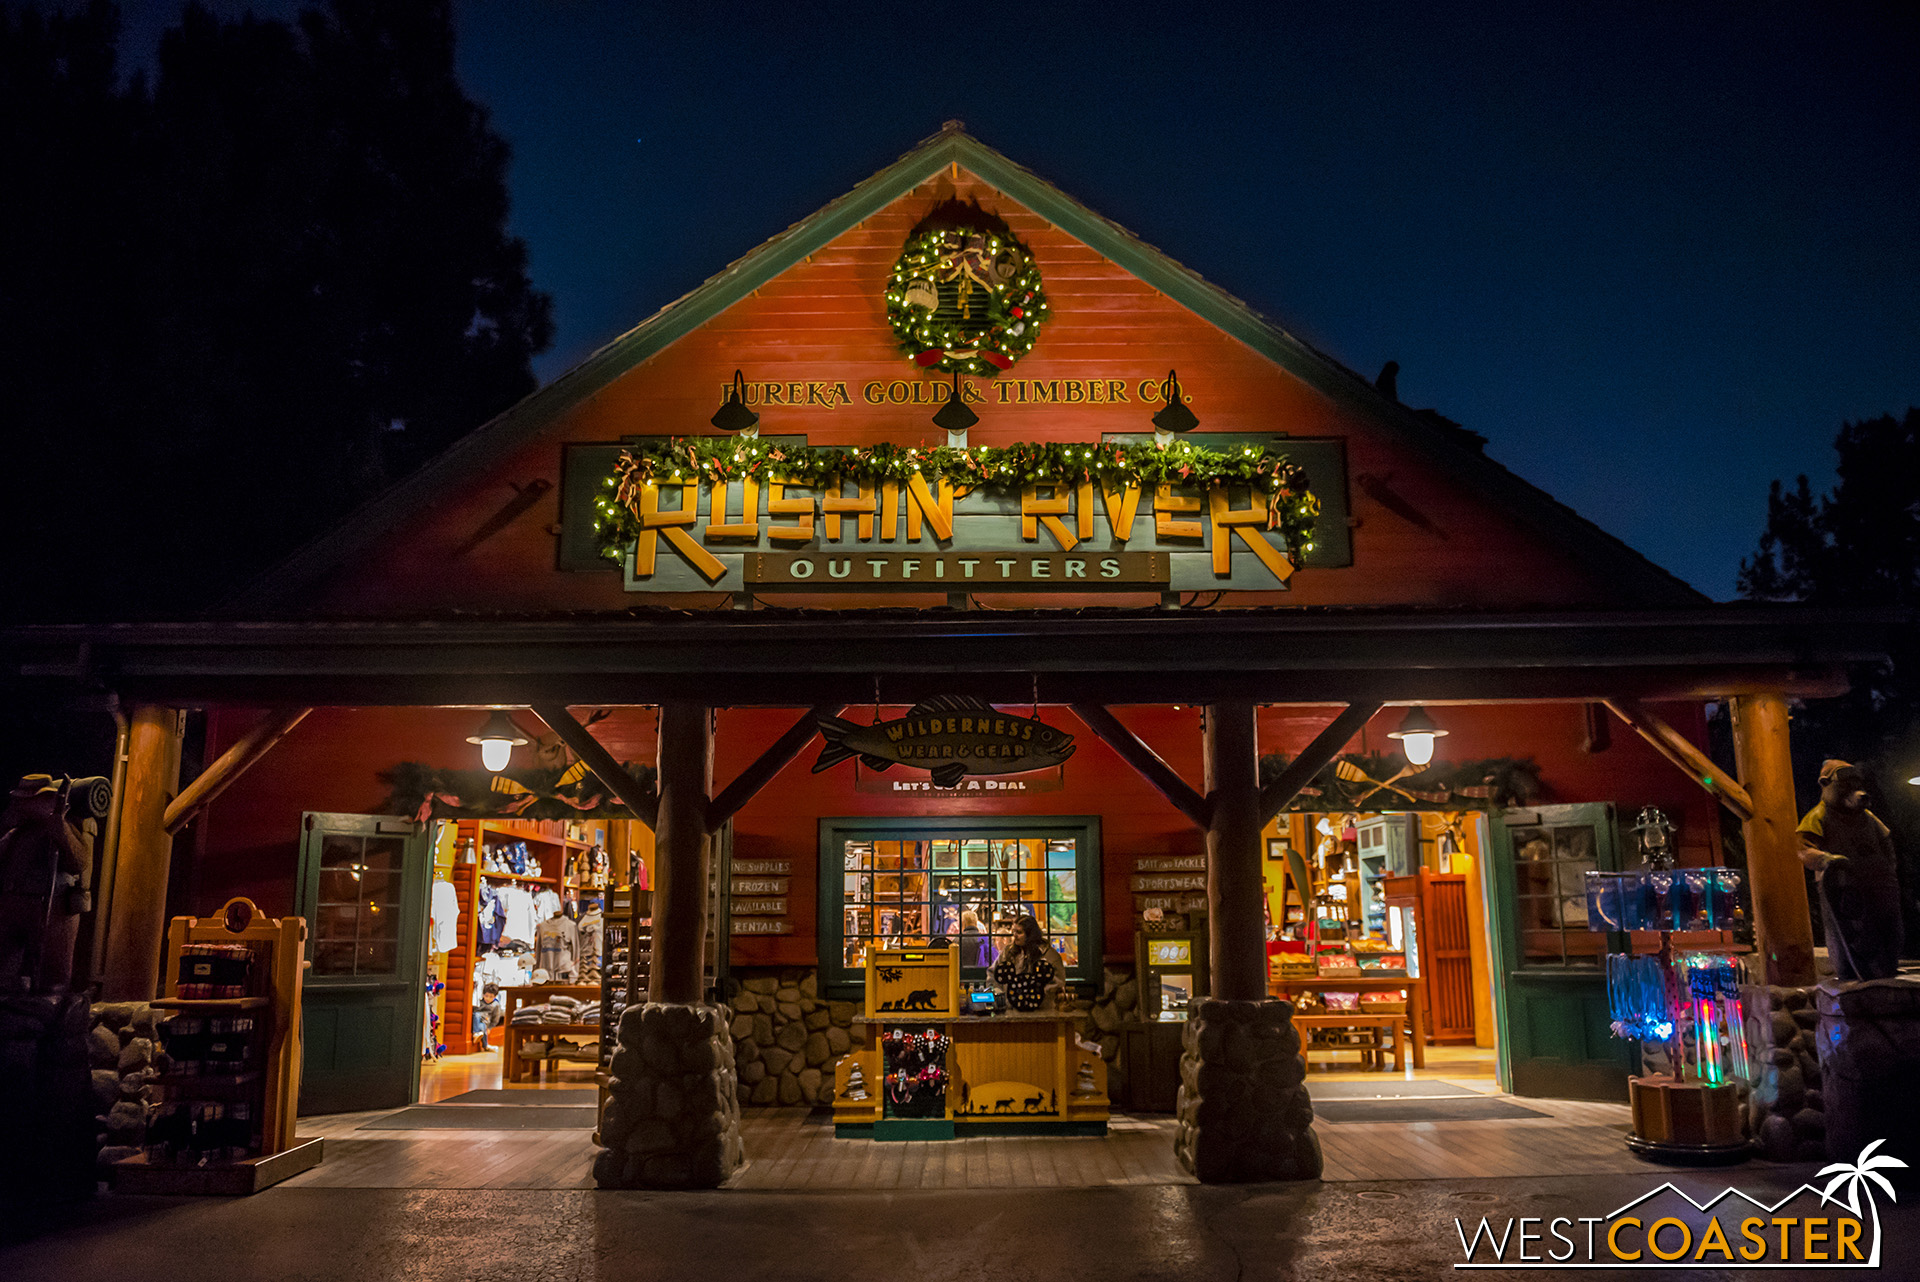  Holiday decorations were up at Grizzly Peak in California Adventure too. 